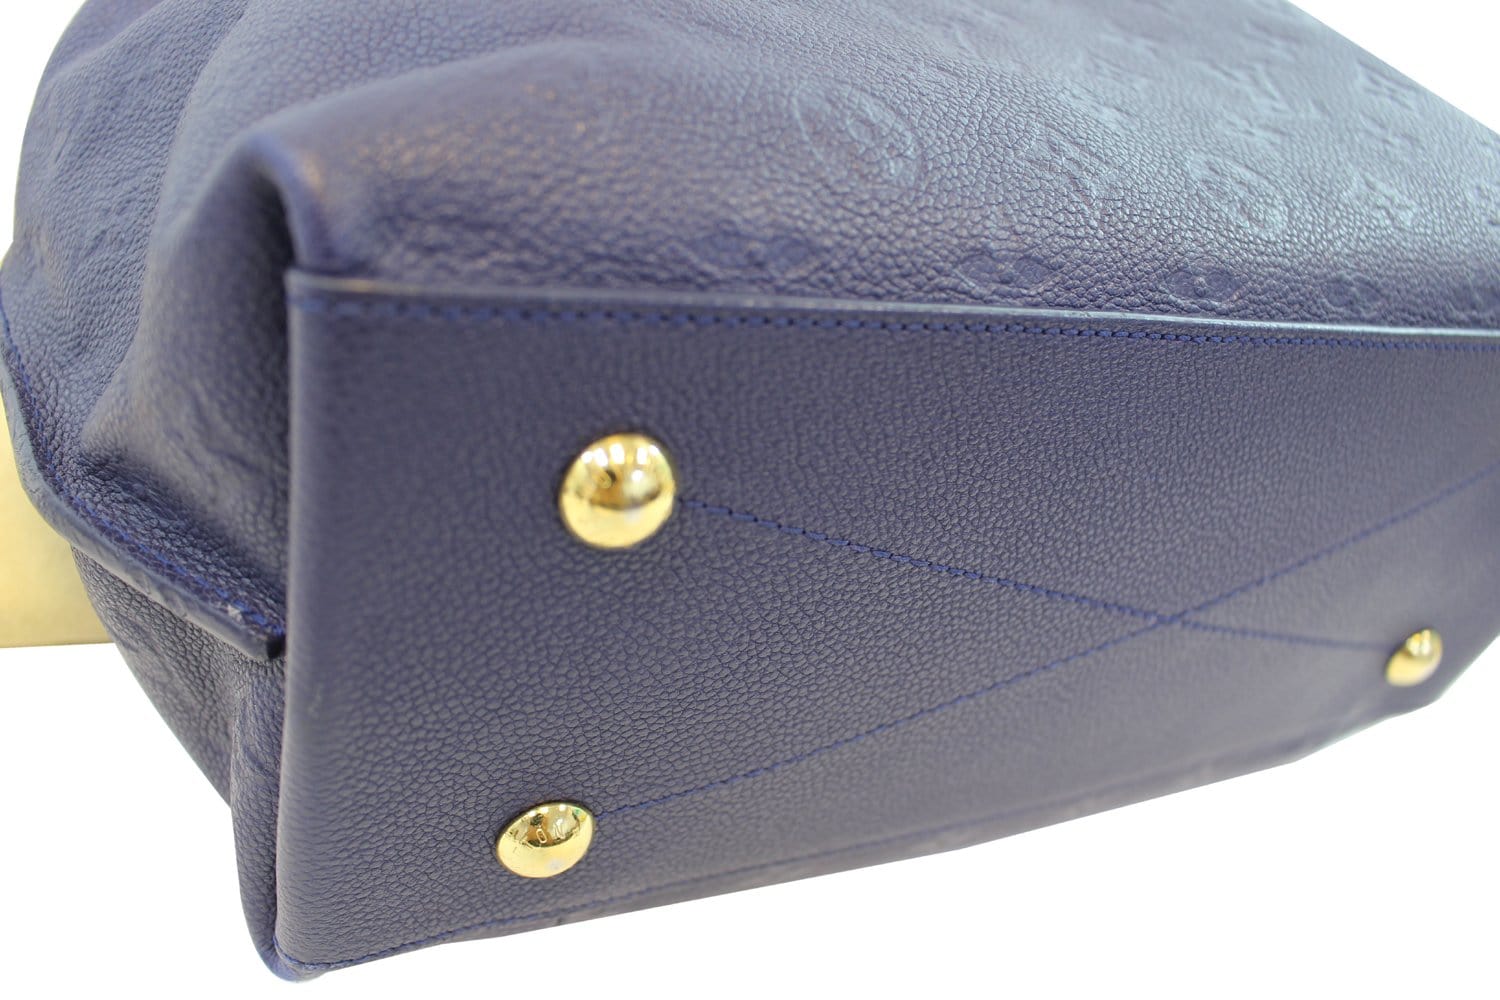 Celeste Wallet Monogram Empreinte Leather - Wallets and Small Leather Goods